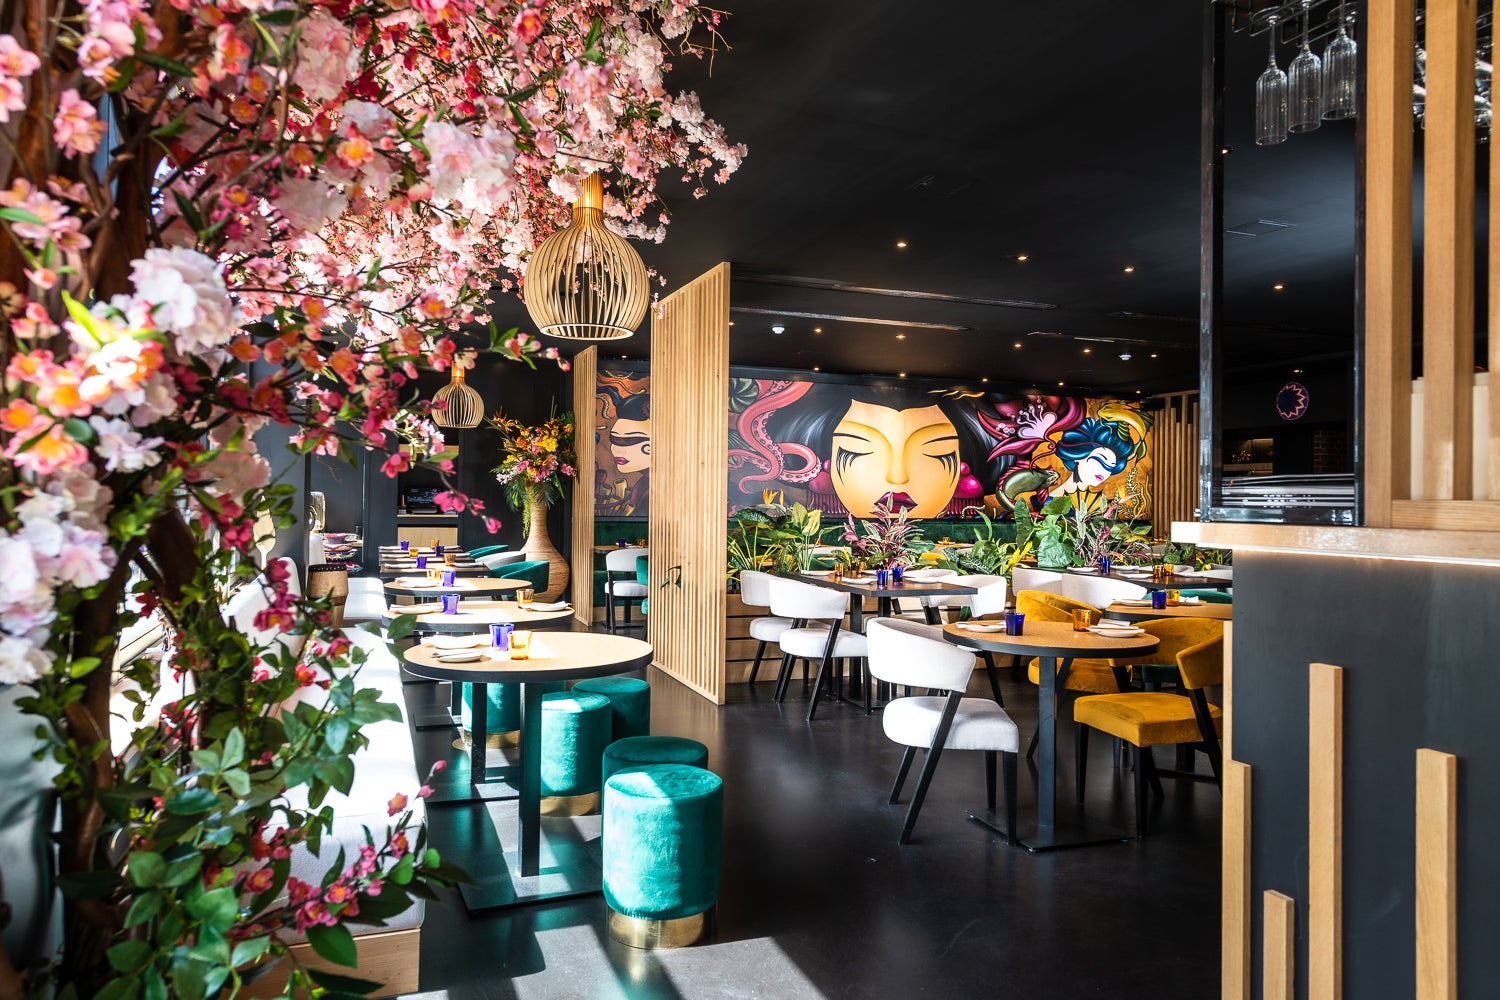 The interior at Nakanojo, featuring an explosion of faux cherry blossoms and a bold mural